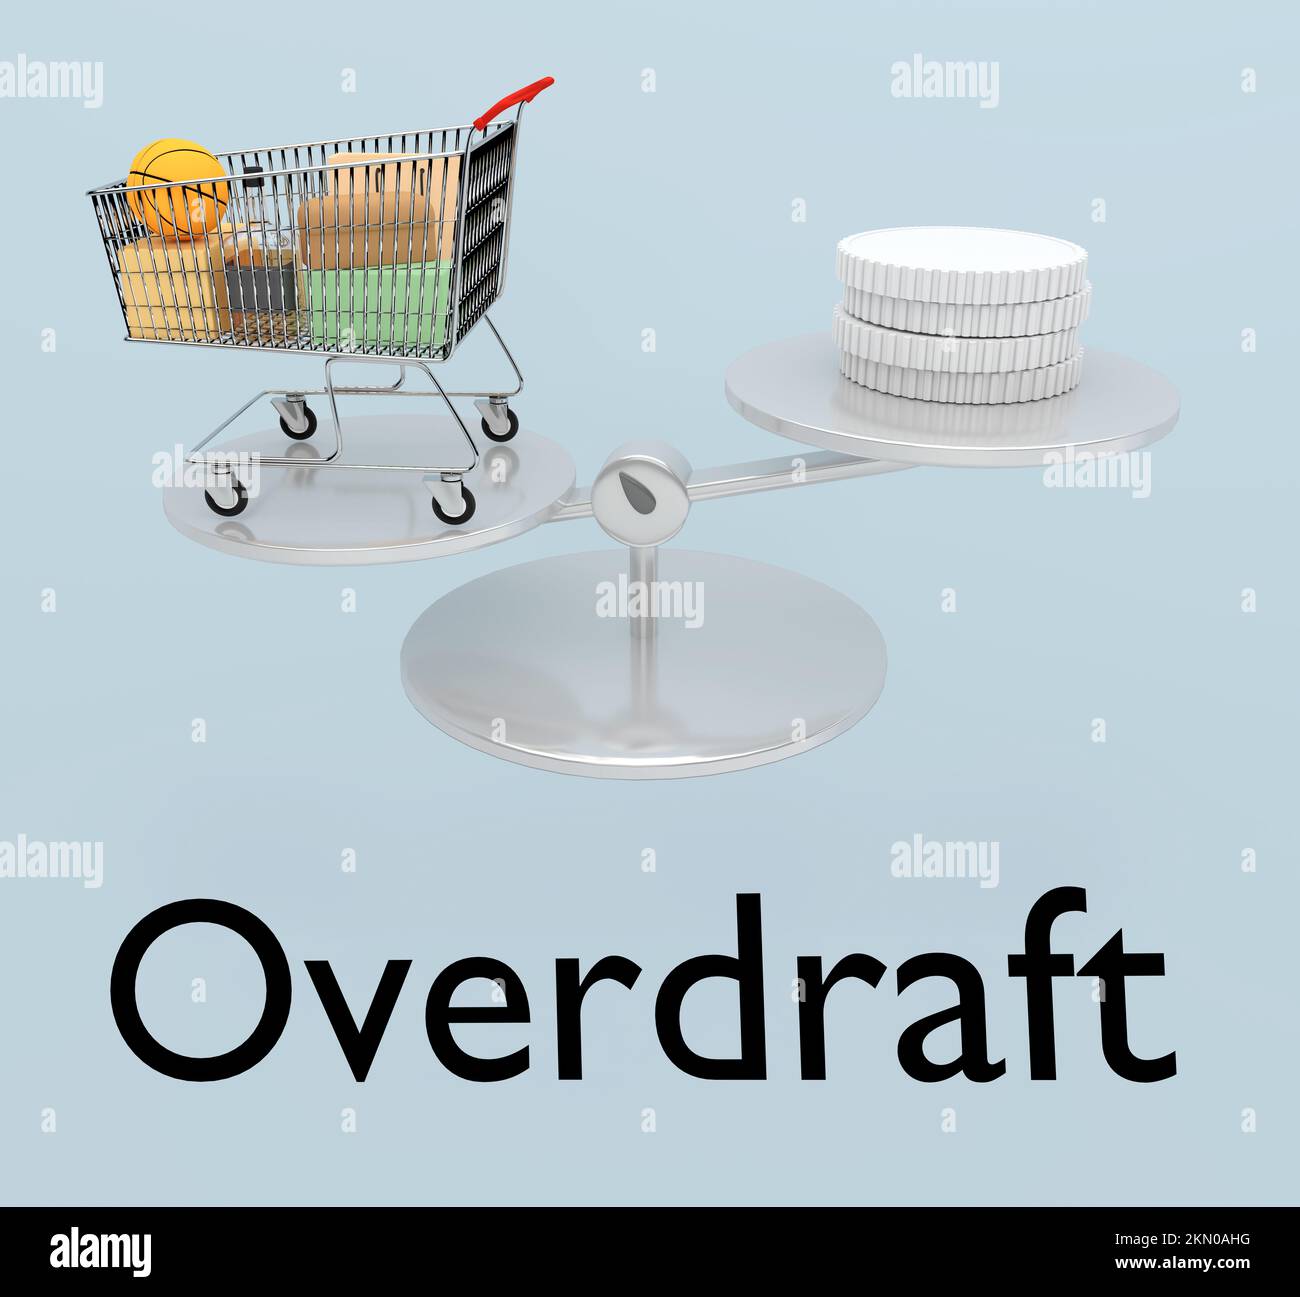 3D illustration of scales loaded with a pile of silver coins on one hand and a loaded supermarket cart on the other hand, and the script Overdraft at Stock Photo